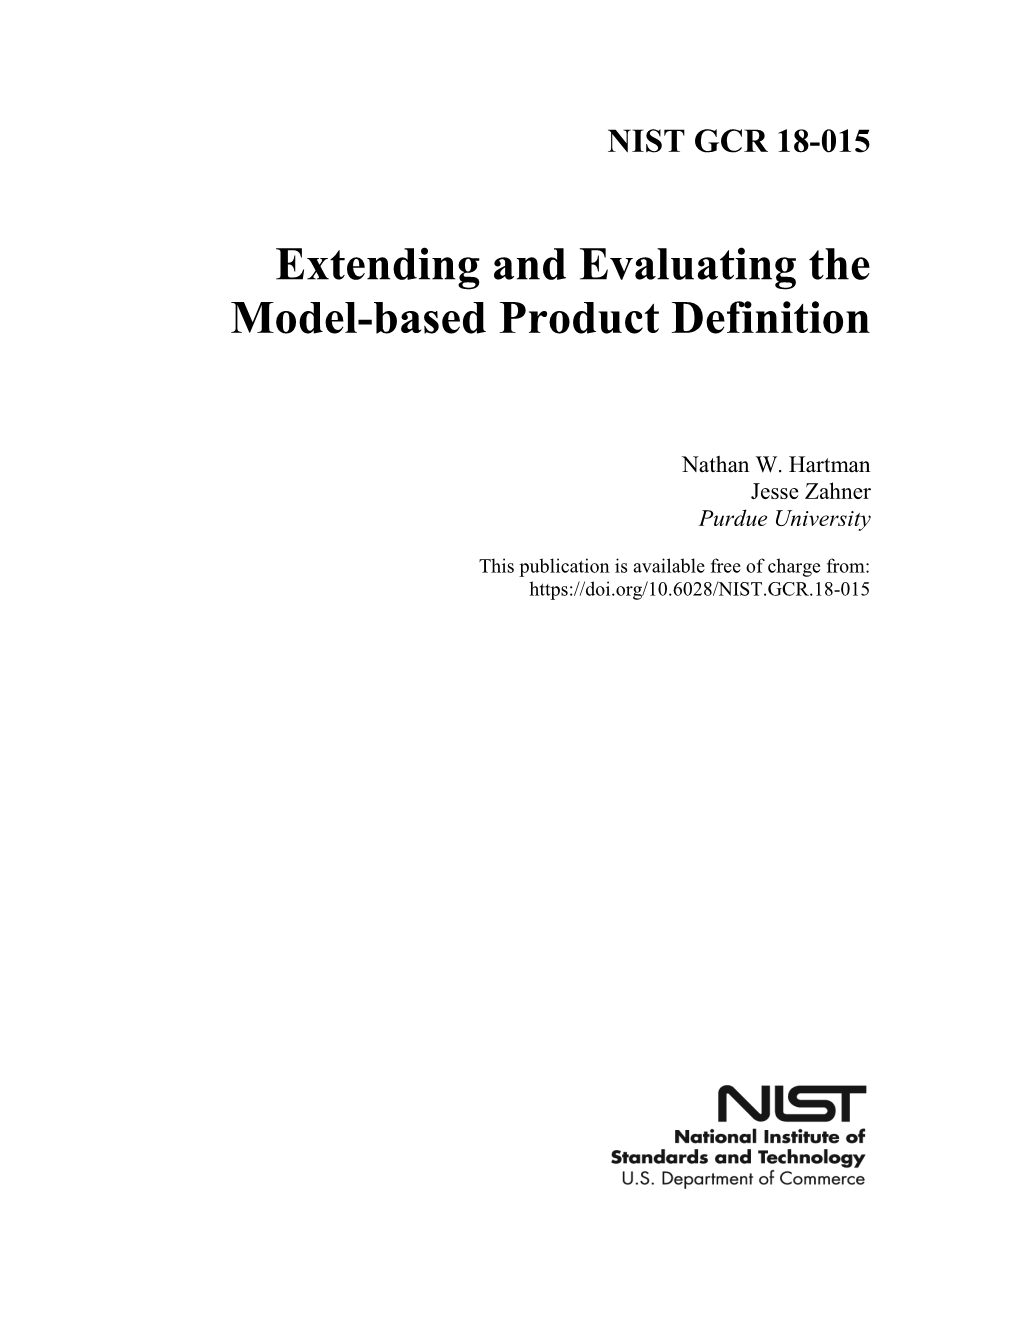 Extending and Evaluating the Model-Based Product Definition